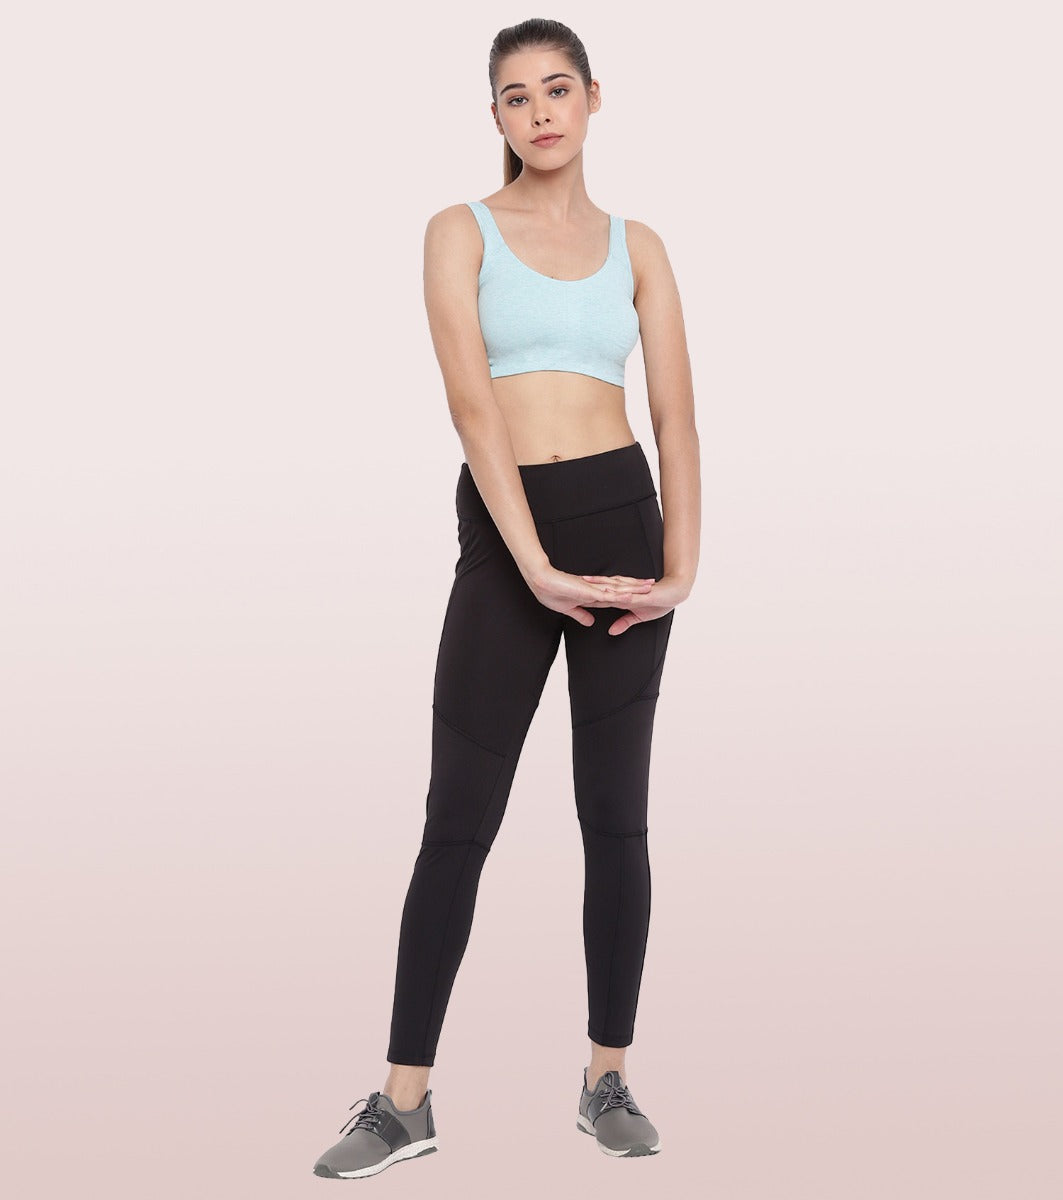 Buy Enamor SB06 Low Impact Cotton Sports Bra Non-Padded & Wirefree -  Multi-Color (S) - SB06 Online